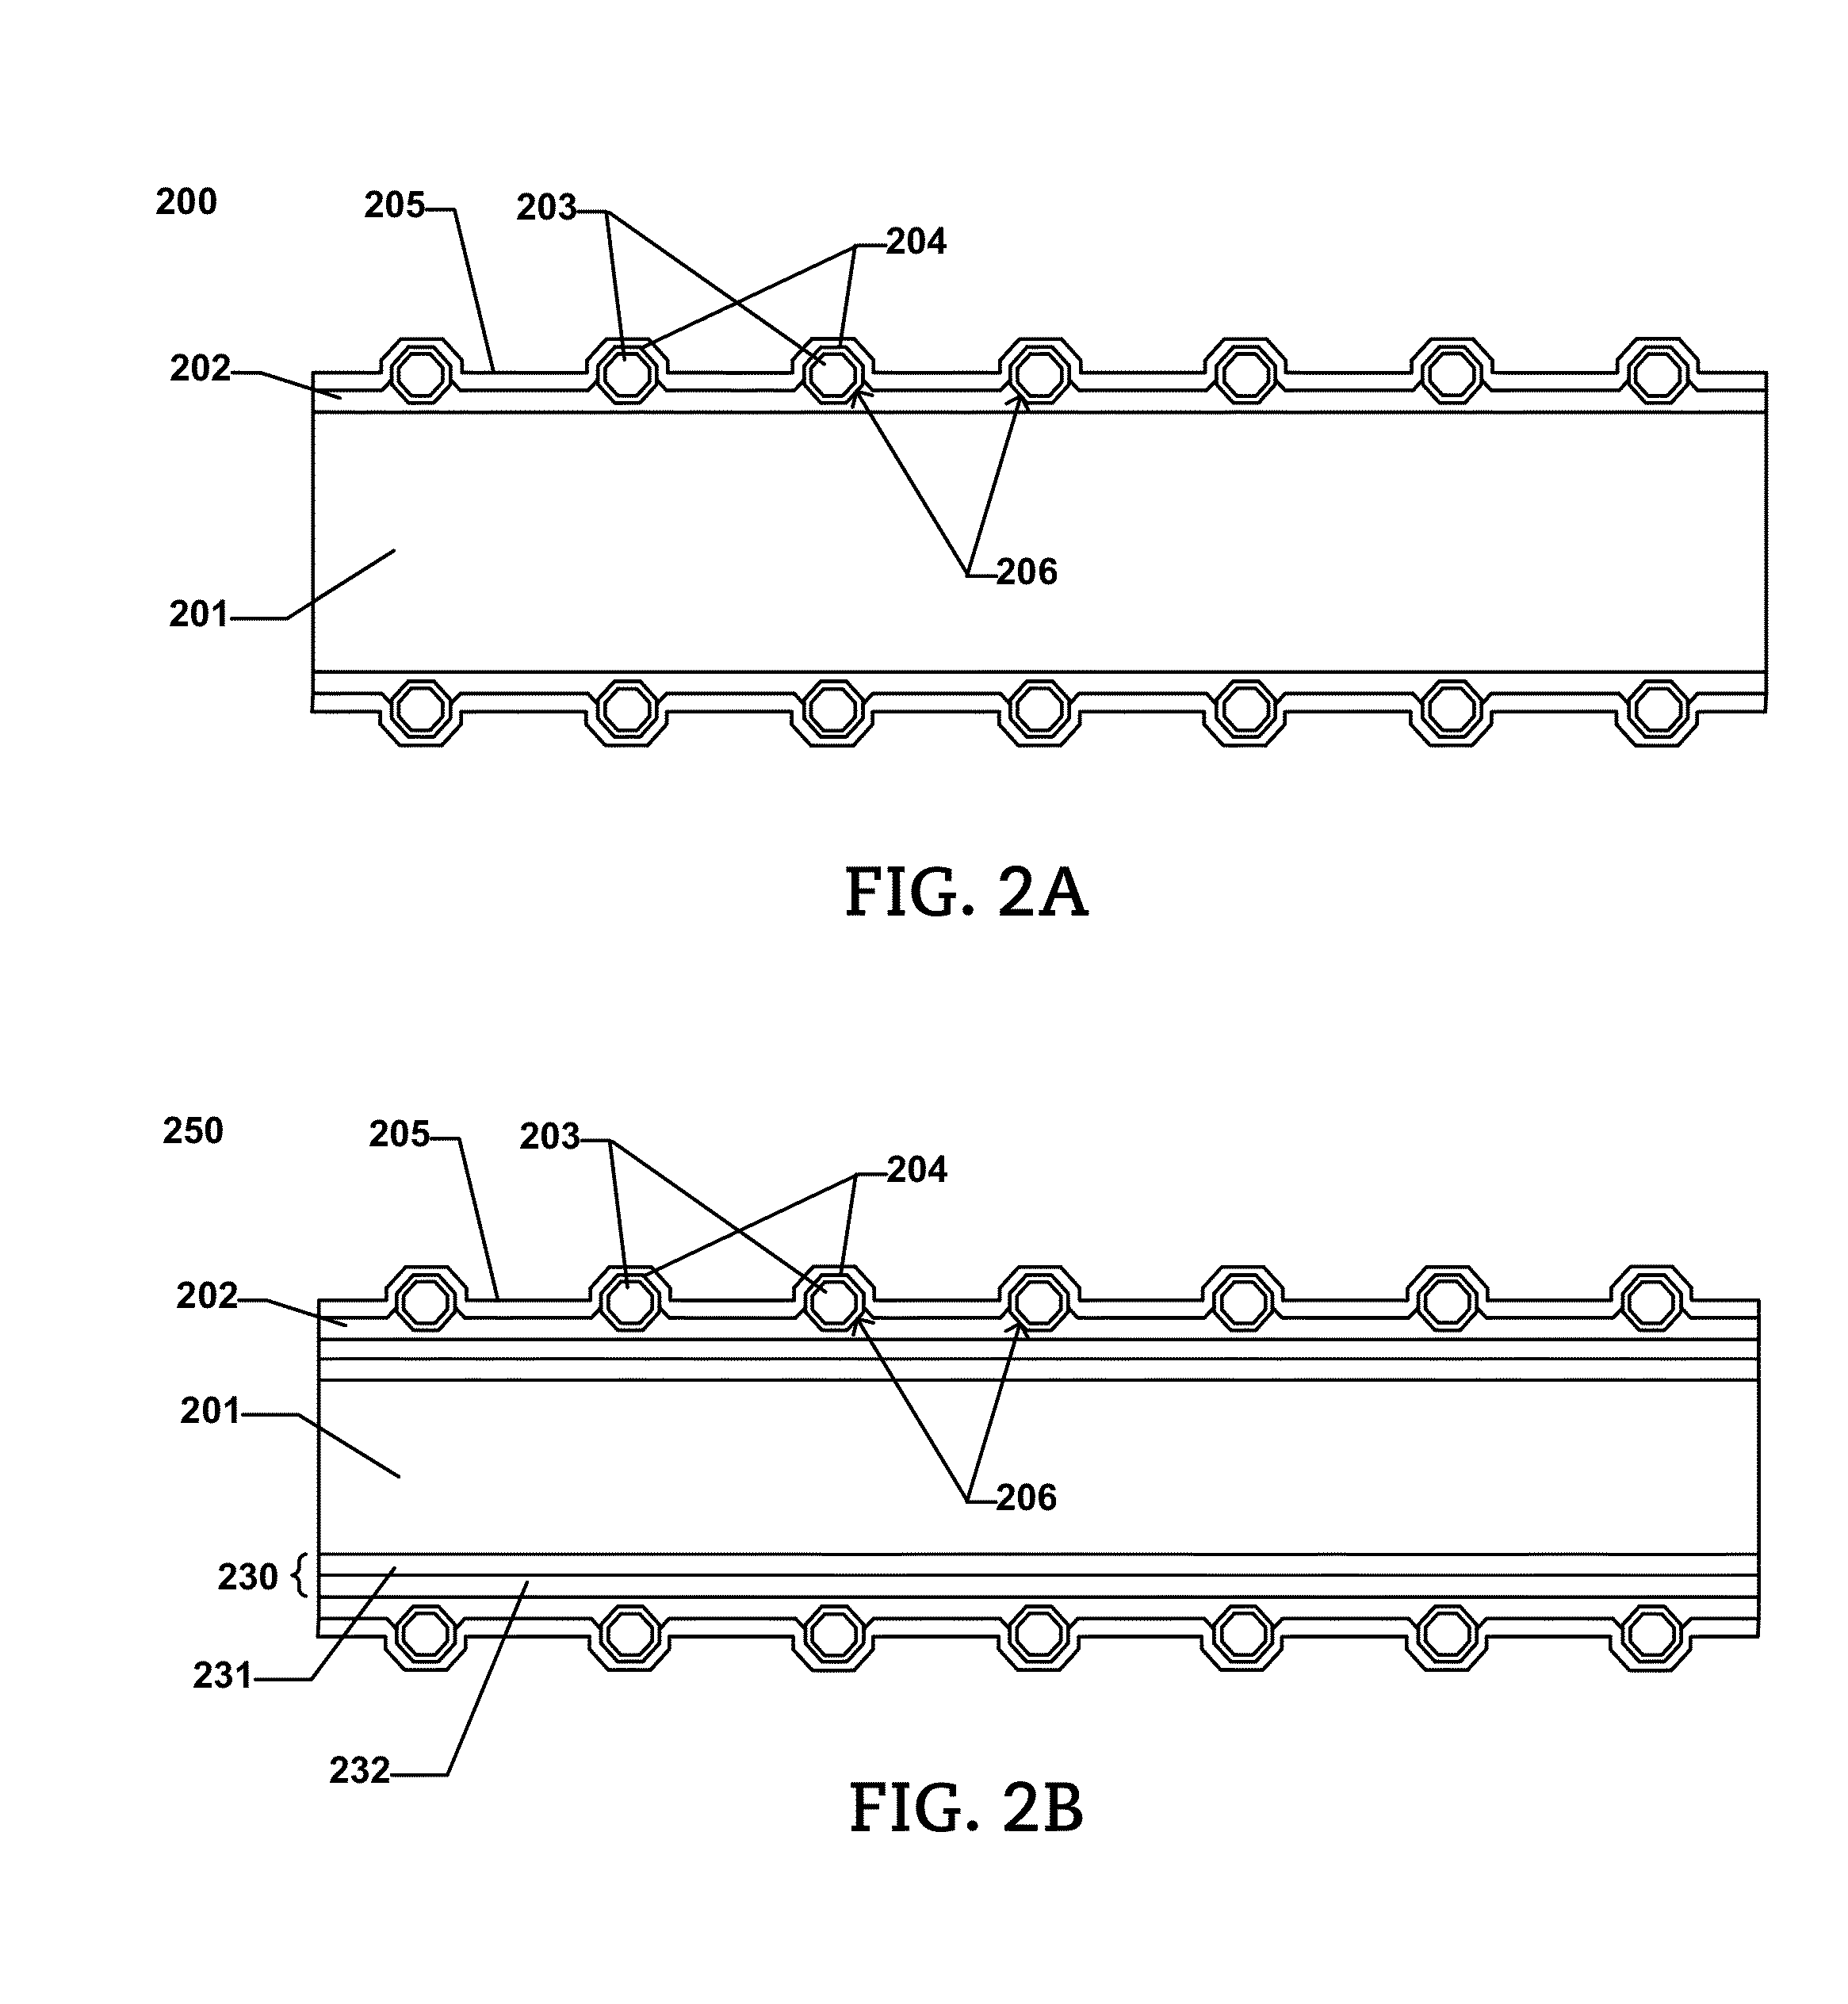 Abrasive Article and Method of Forming